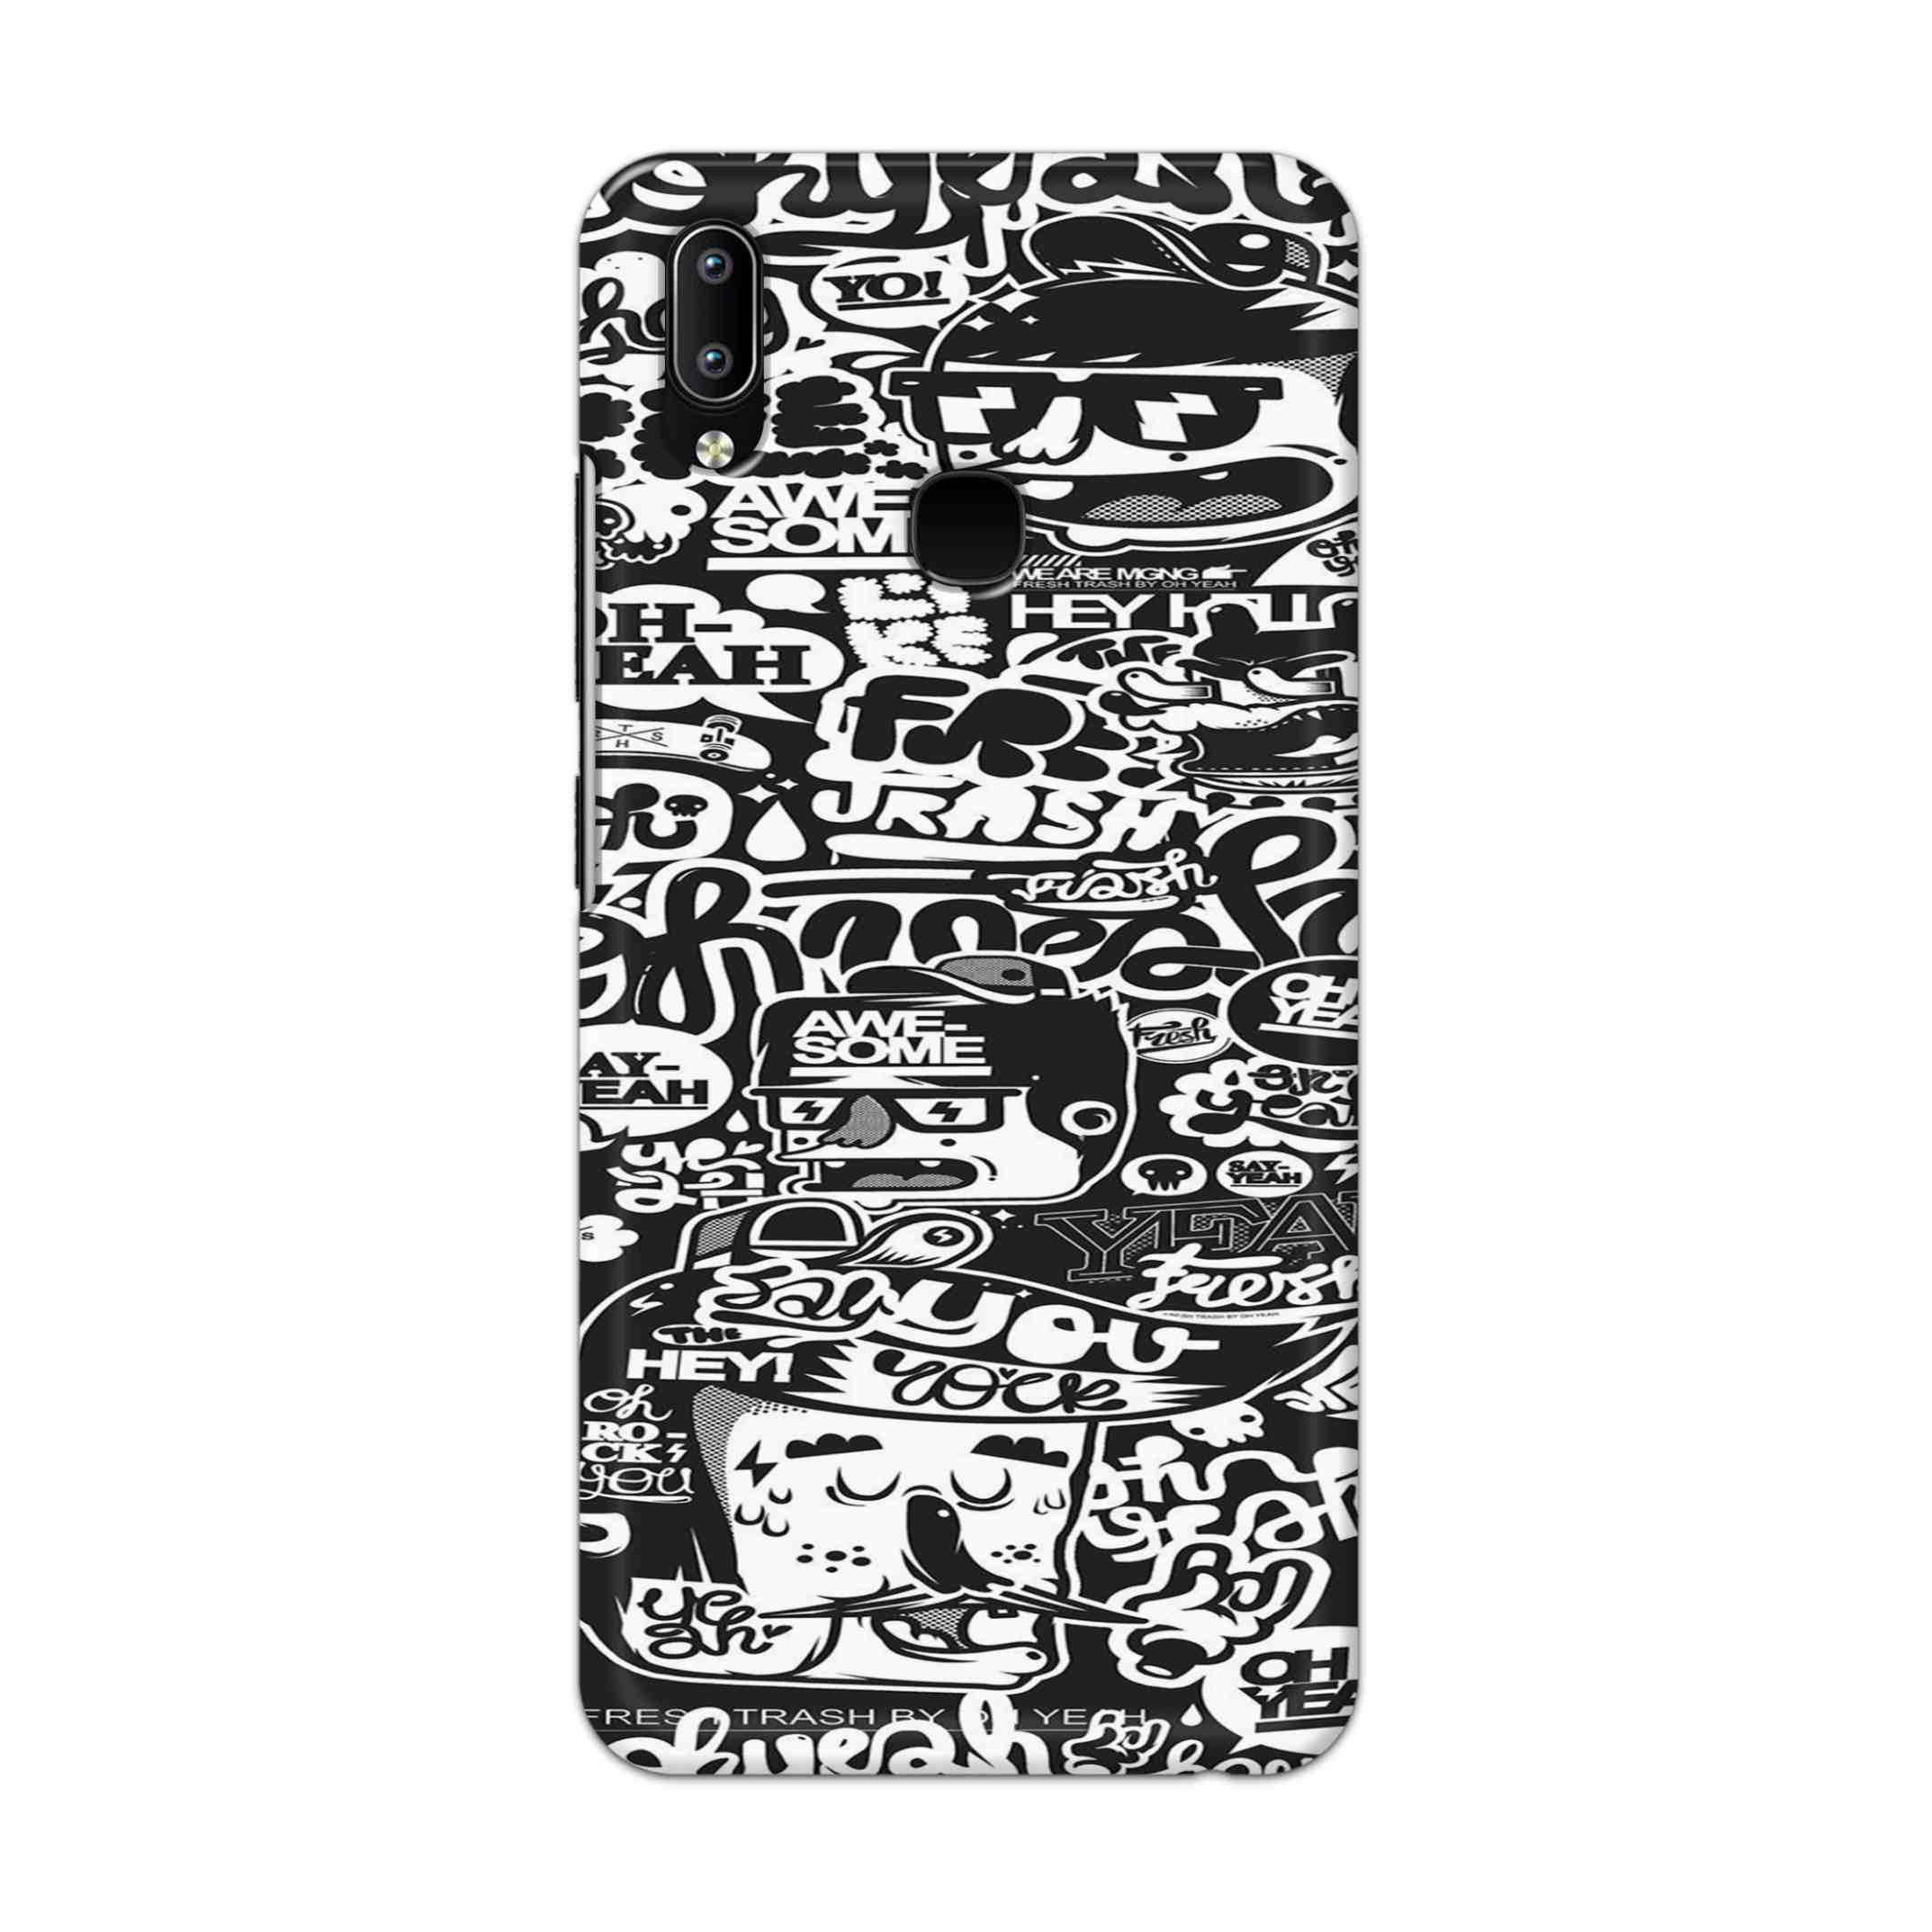 Buy Awesome Hard Back Mobile Phone Case Cover For Vivo Y95 / Y93 / Y91 Online